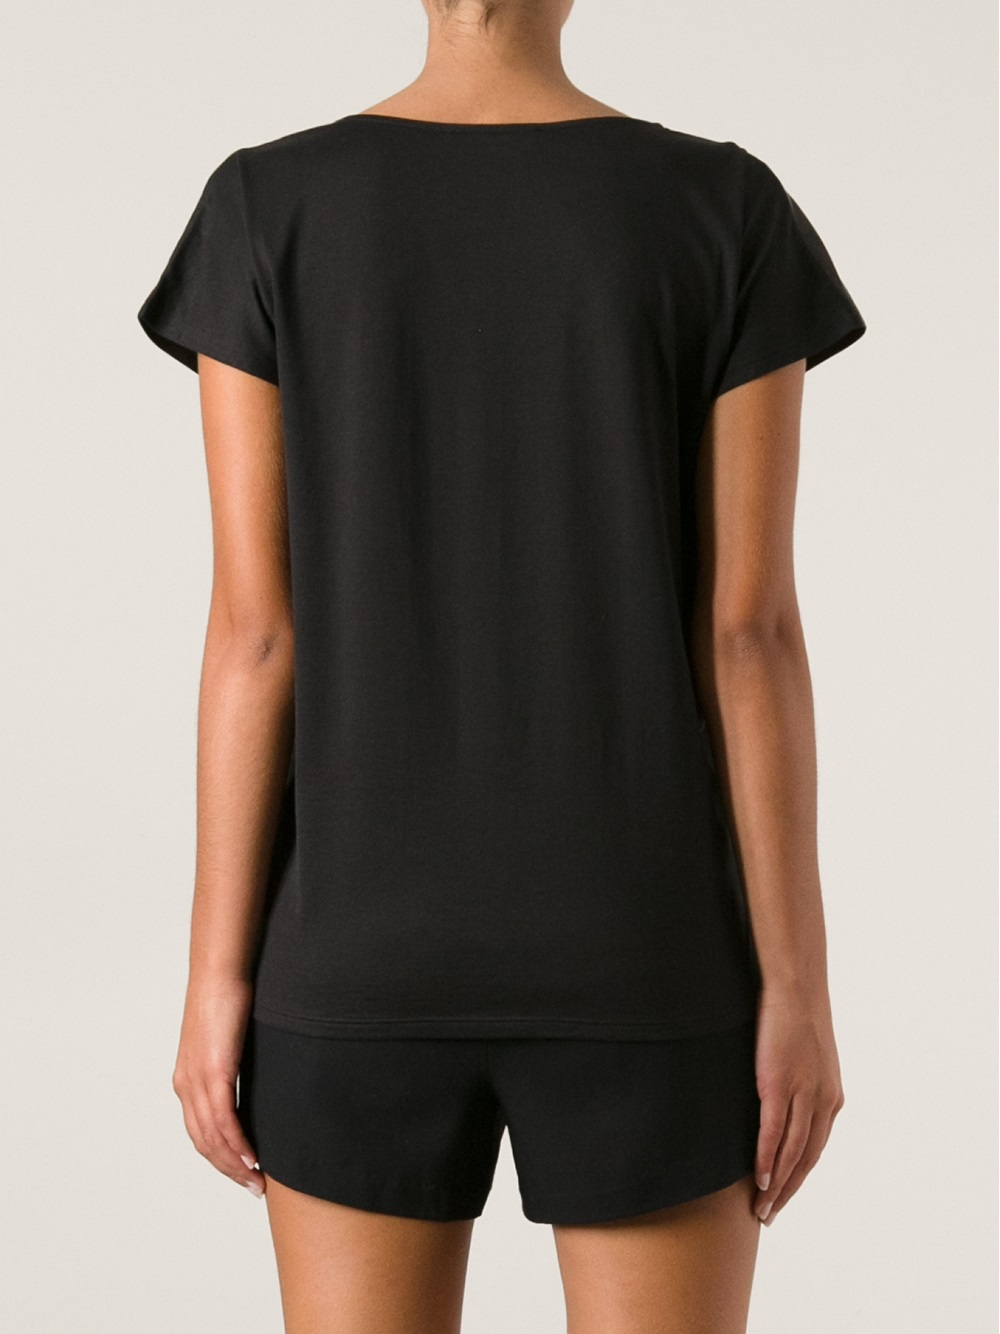 Gucci Leather T-Shirt in Black - Lyst